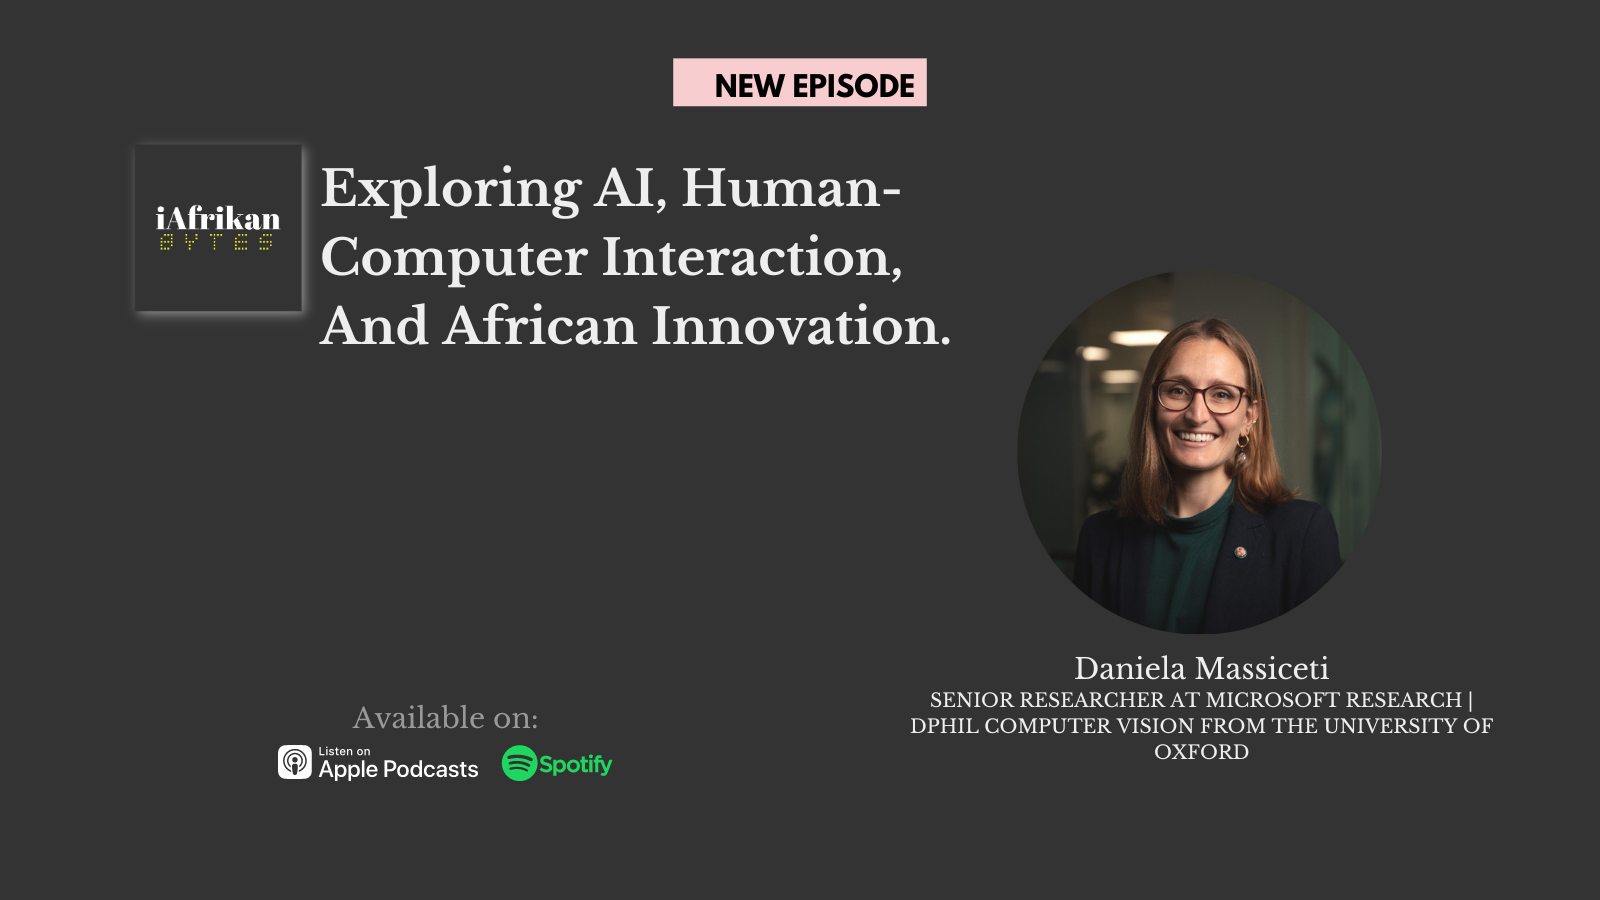 Exploring AI, Human-Computer Interaction, and African Innovation with Daniela Massiceti